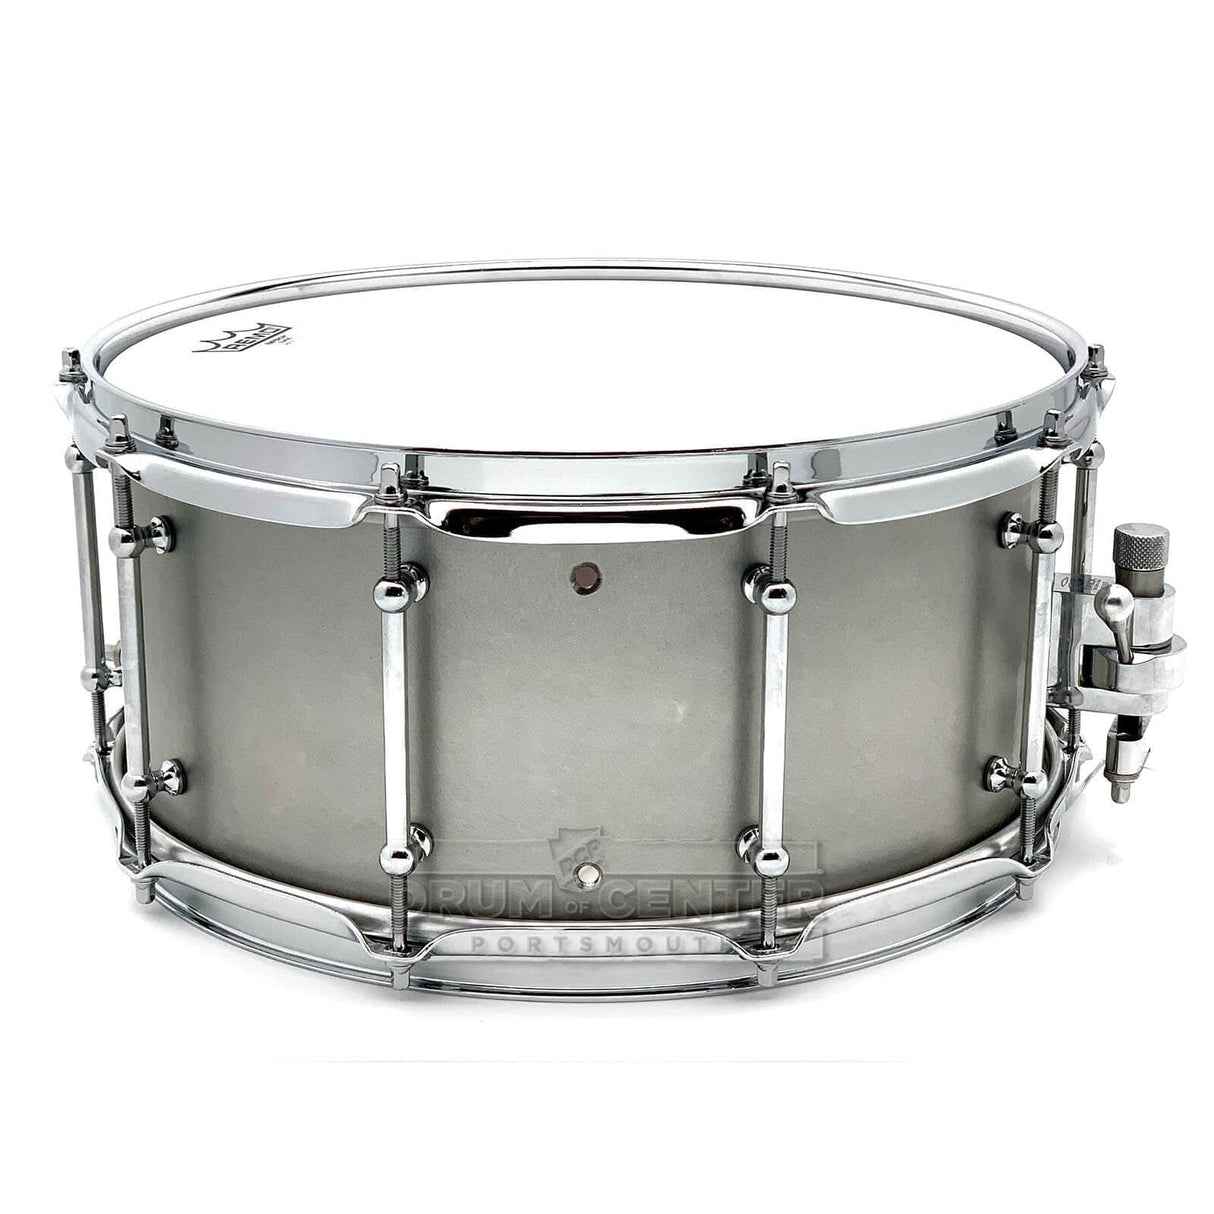 Keplinger Stainless Steel Snare Drum 14x6.5 w/Trick Throwoff